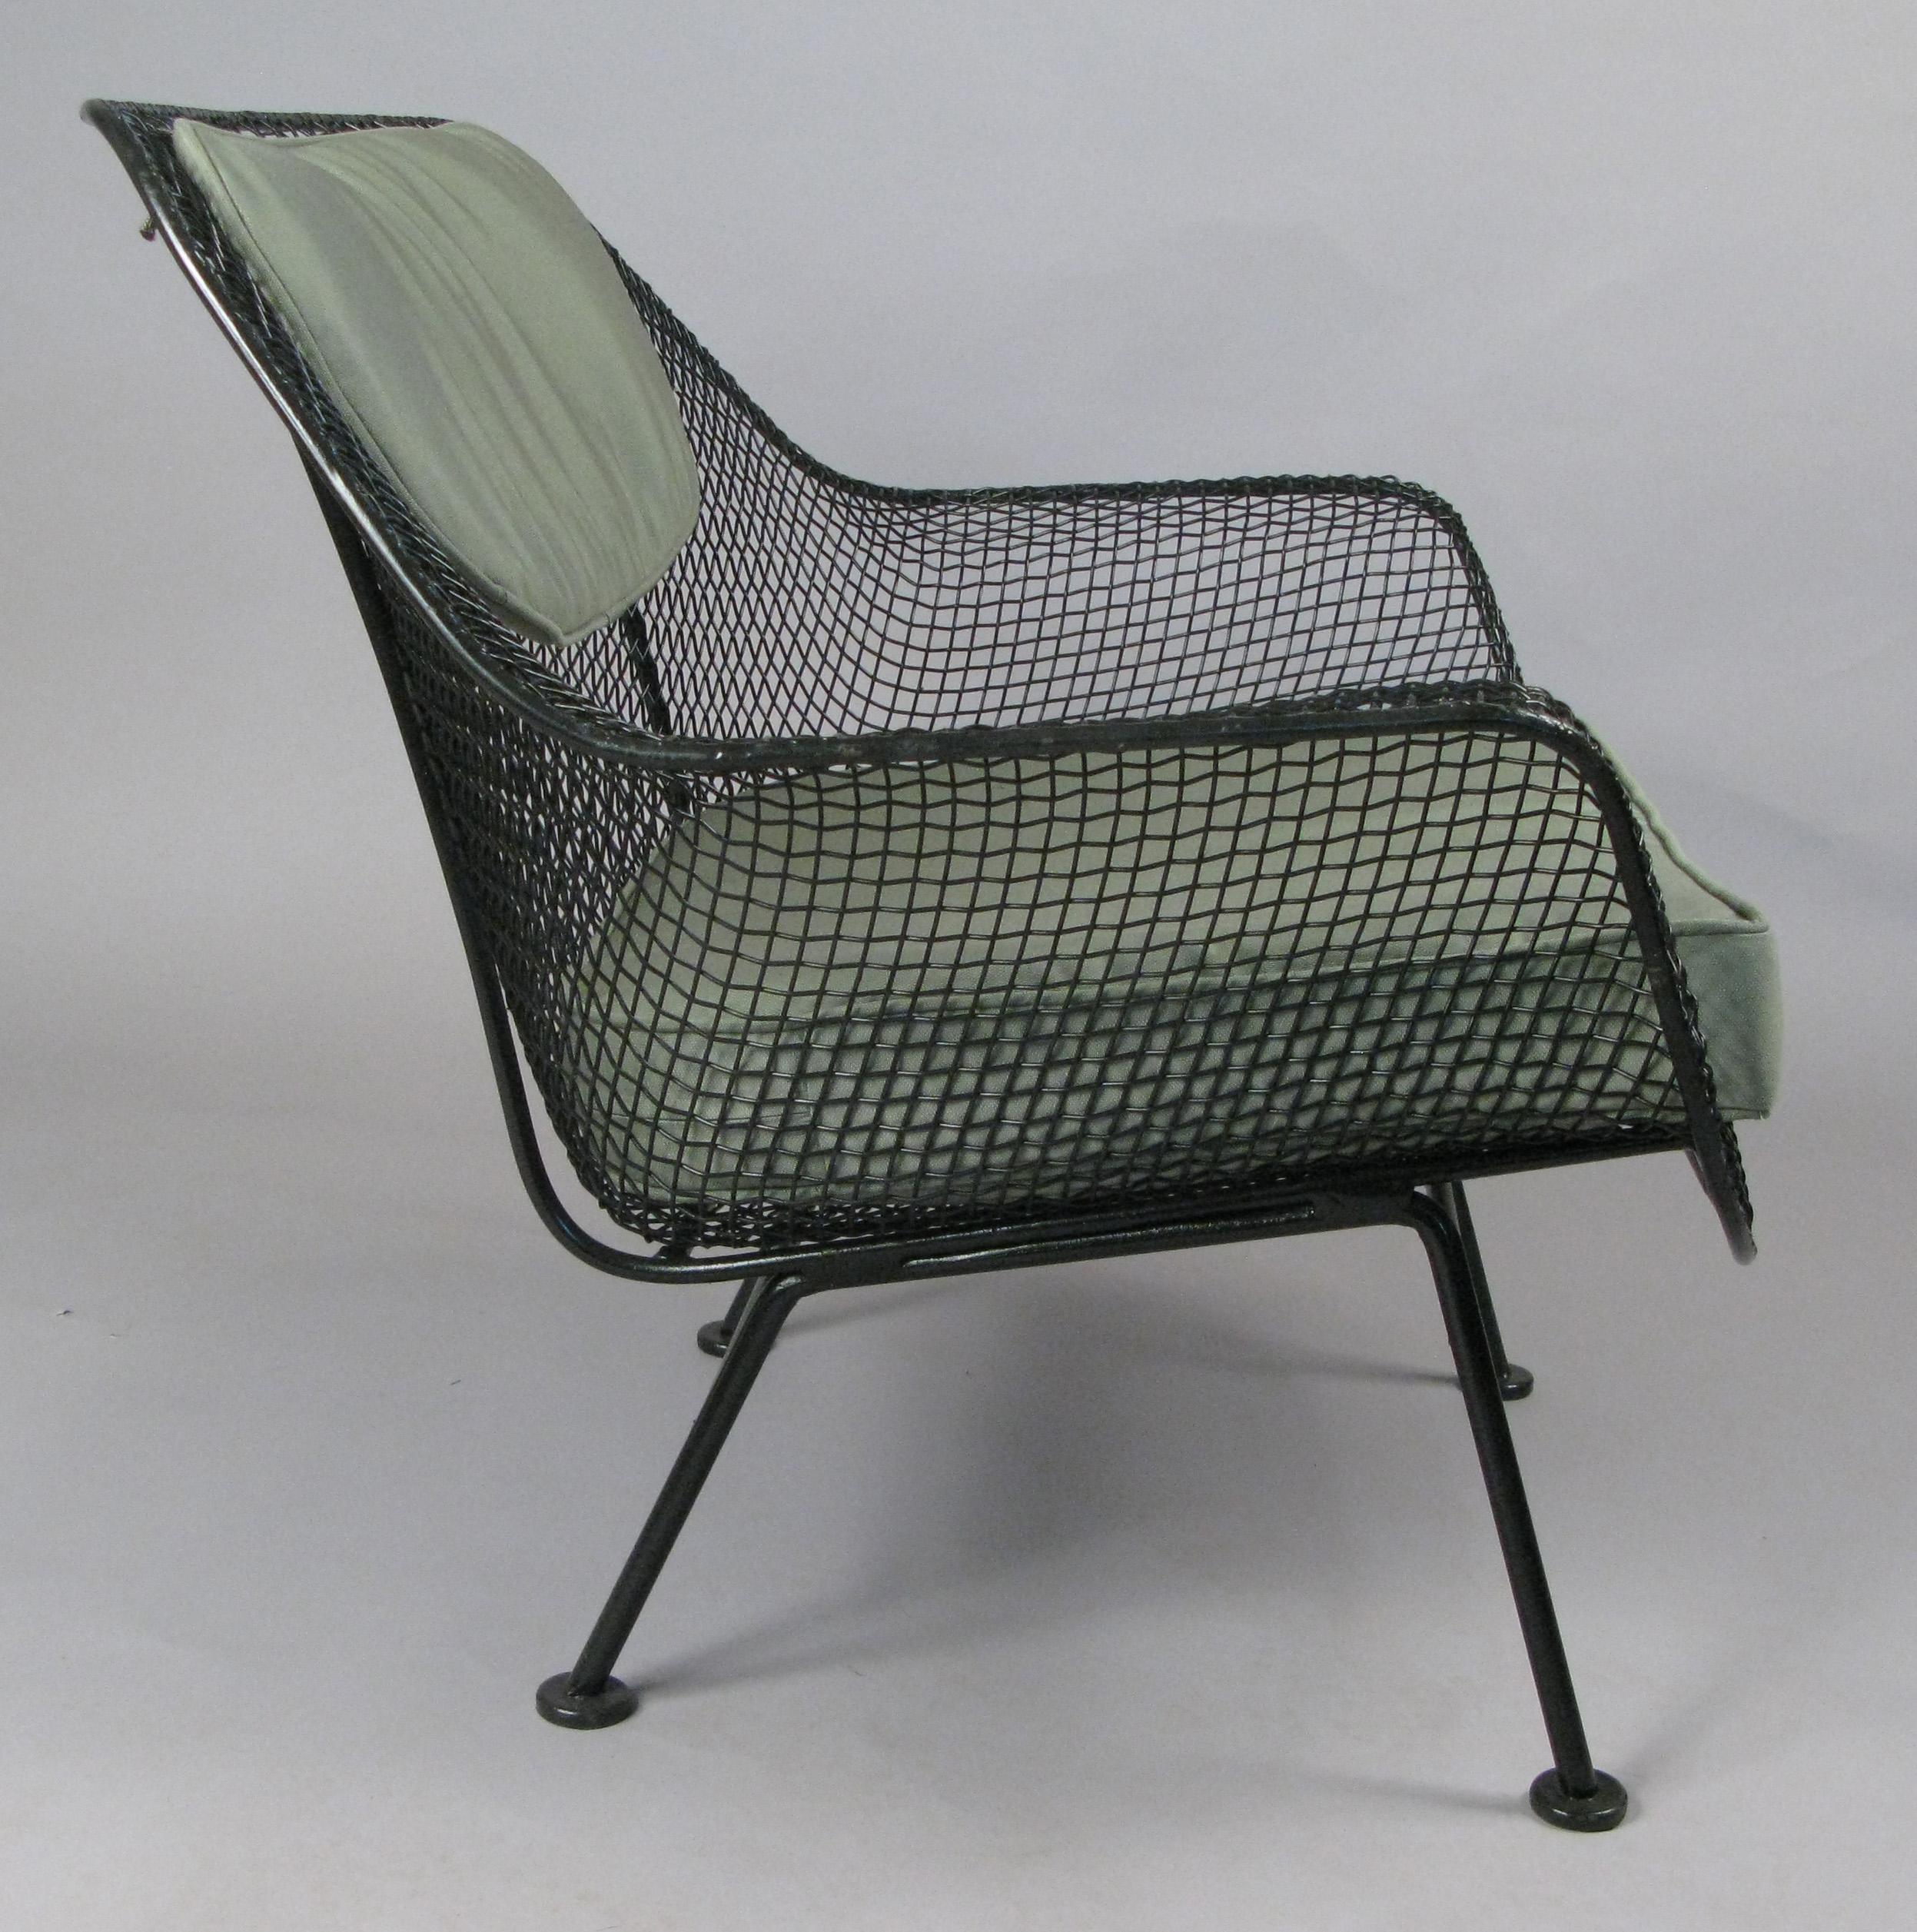 American Pair of 1950s Sculptura Lounge Chairs by Russell Woodard